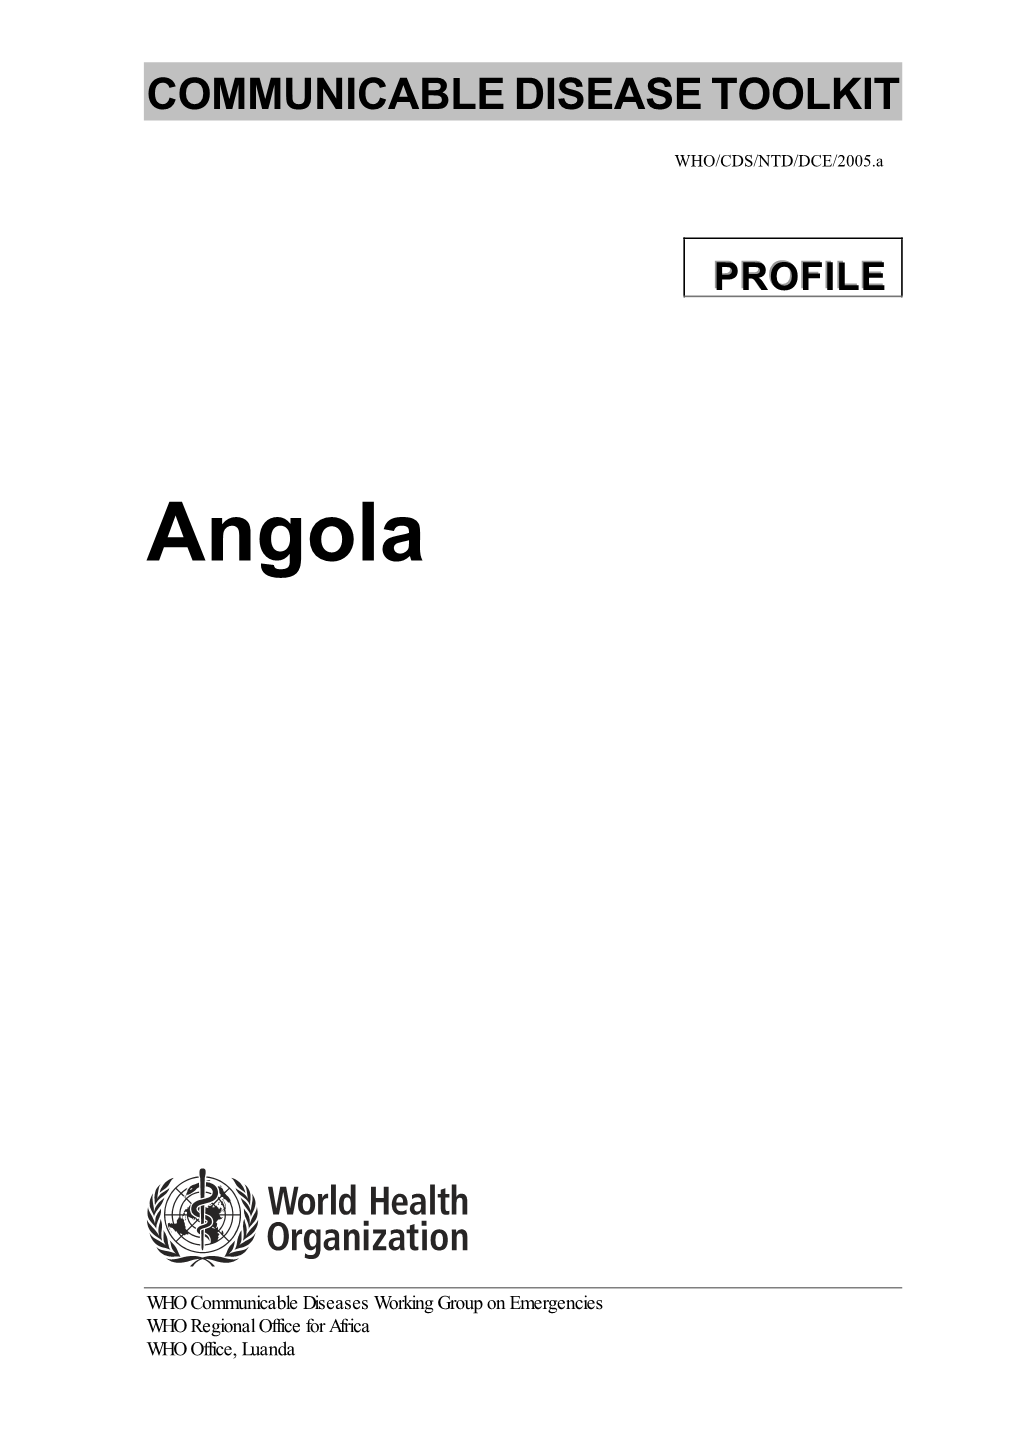 Communicable Disease Toolkit for Angola